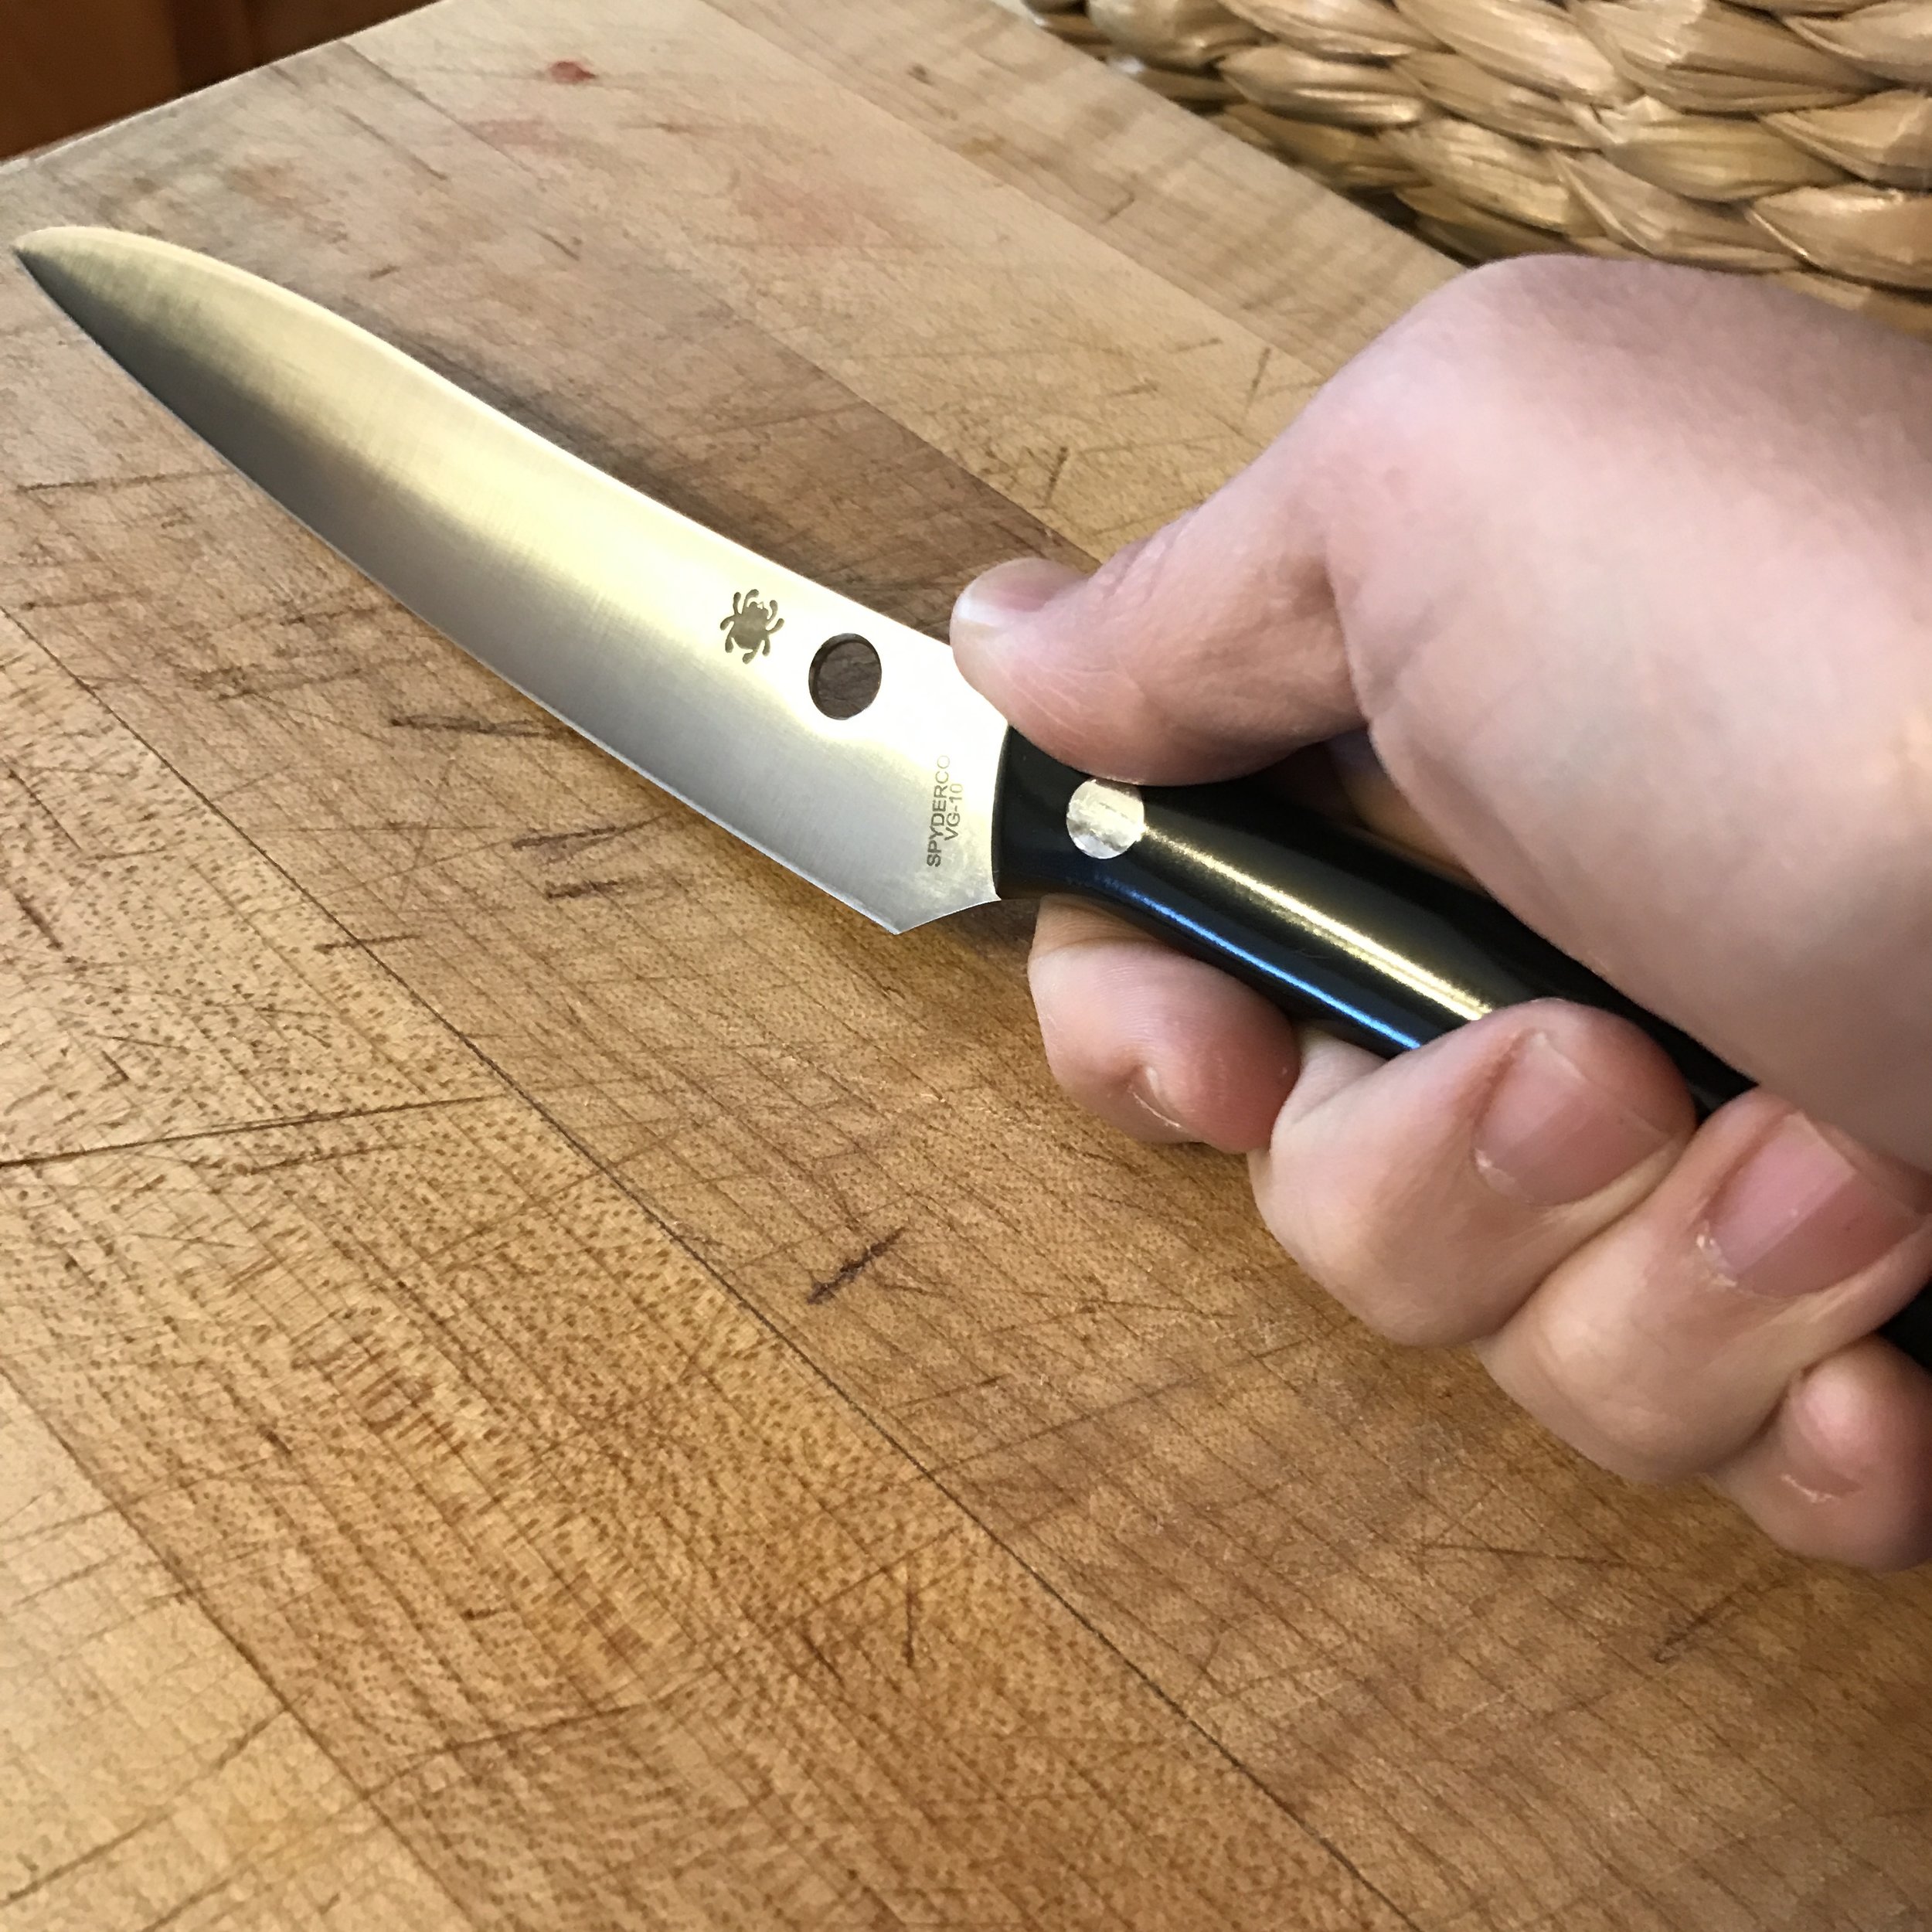 Spyderco Z cut. I have loved cooking long before I got into knives. As  someone that loves spyderco and cooking, these kitchen blades are perfect  slicers 🤘🏻 : r/spyderco